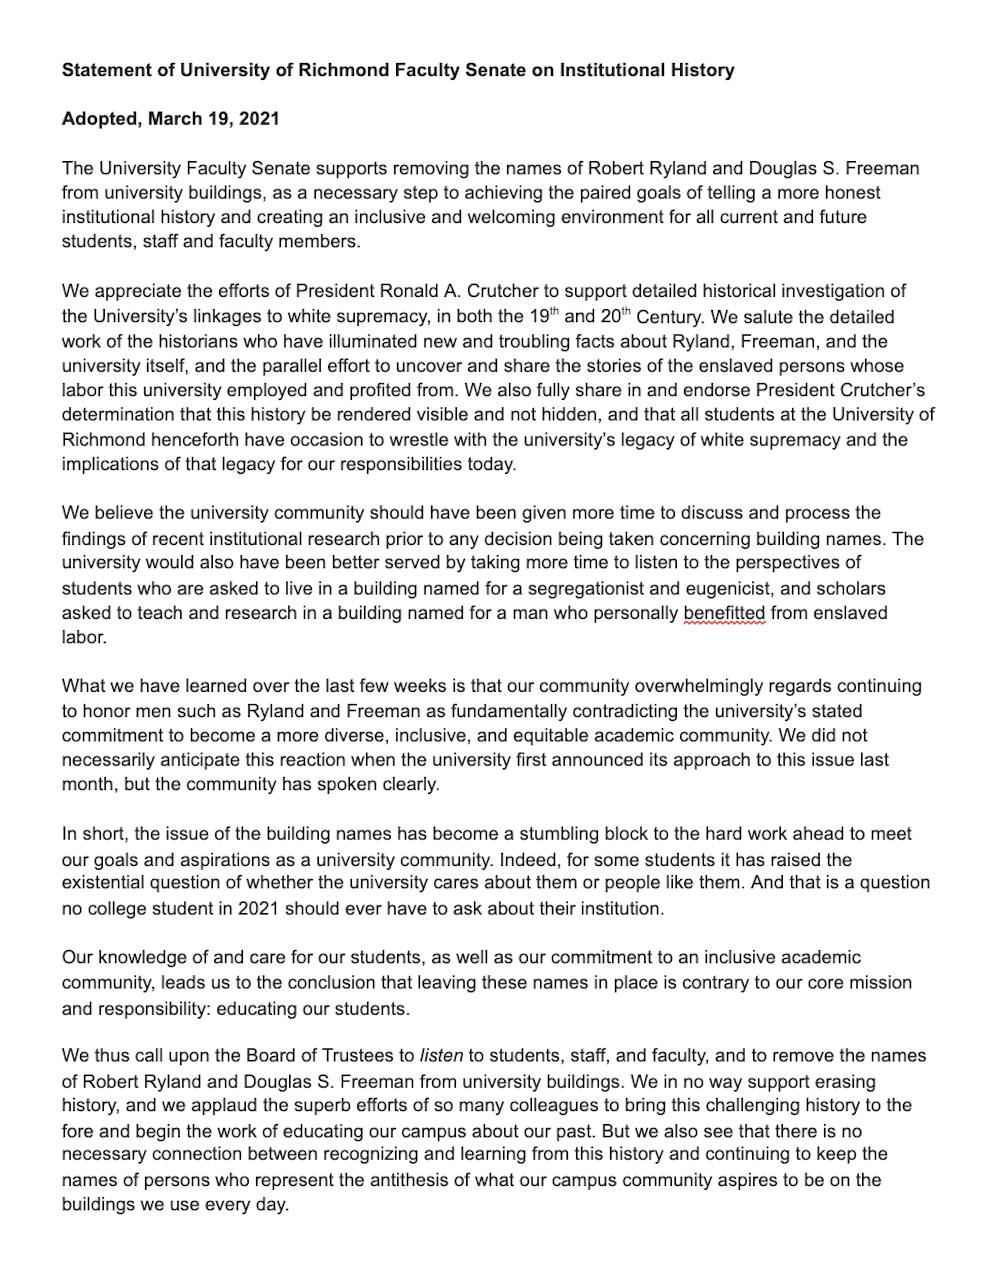 faculty-senate-institutional-history-statement.png